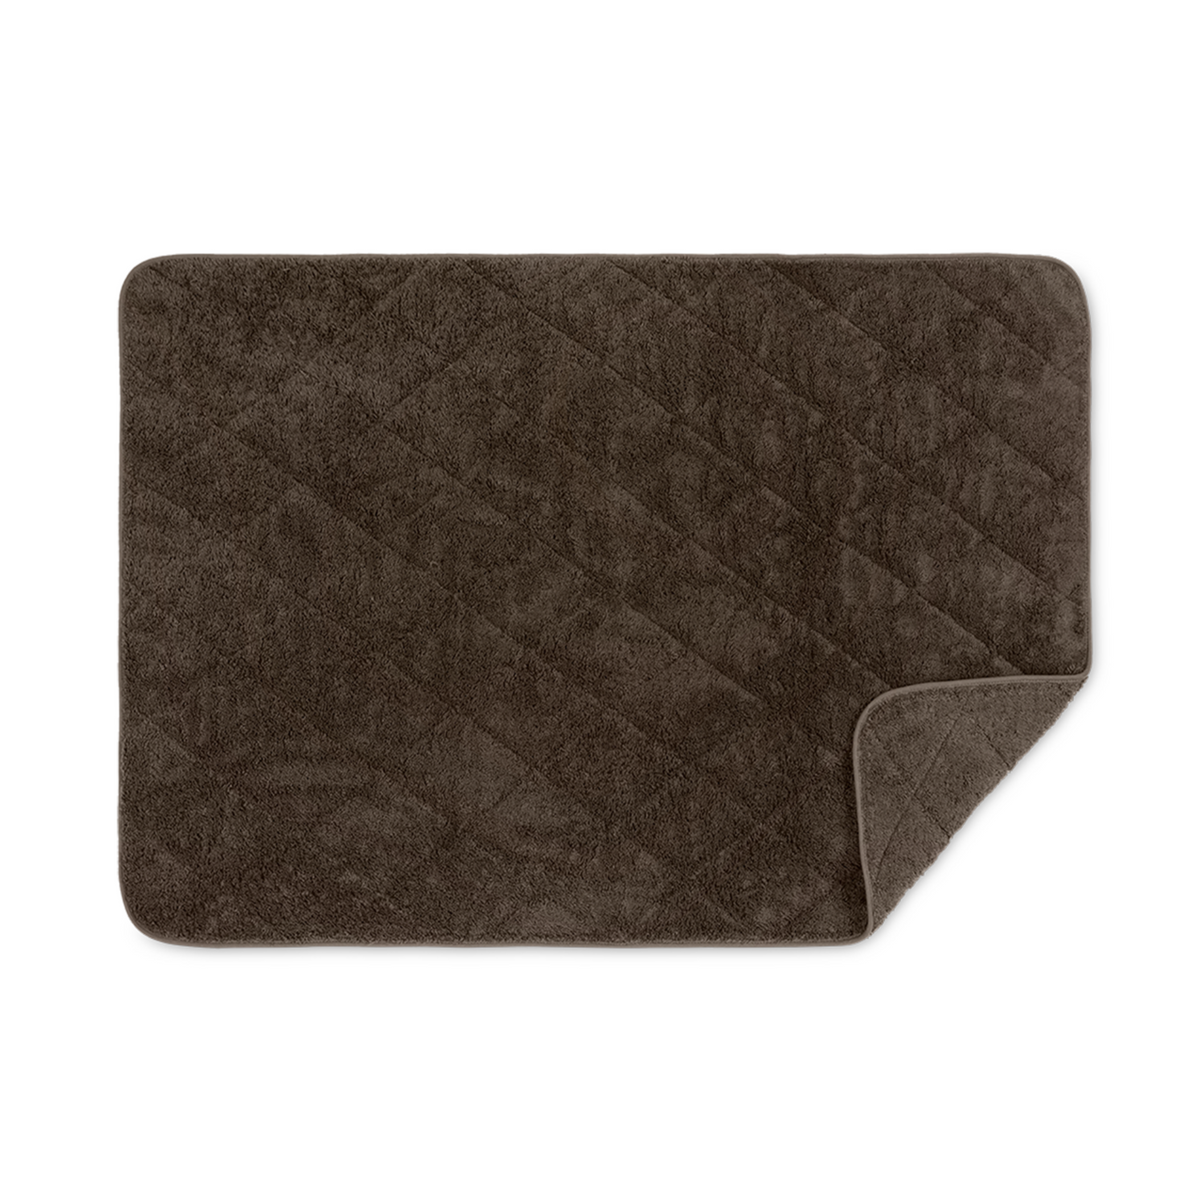 Sample Image of Matouk Cairo Bath Quilted Tub Mat Sable/Sable